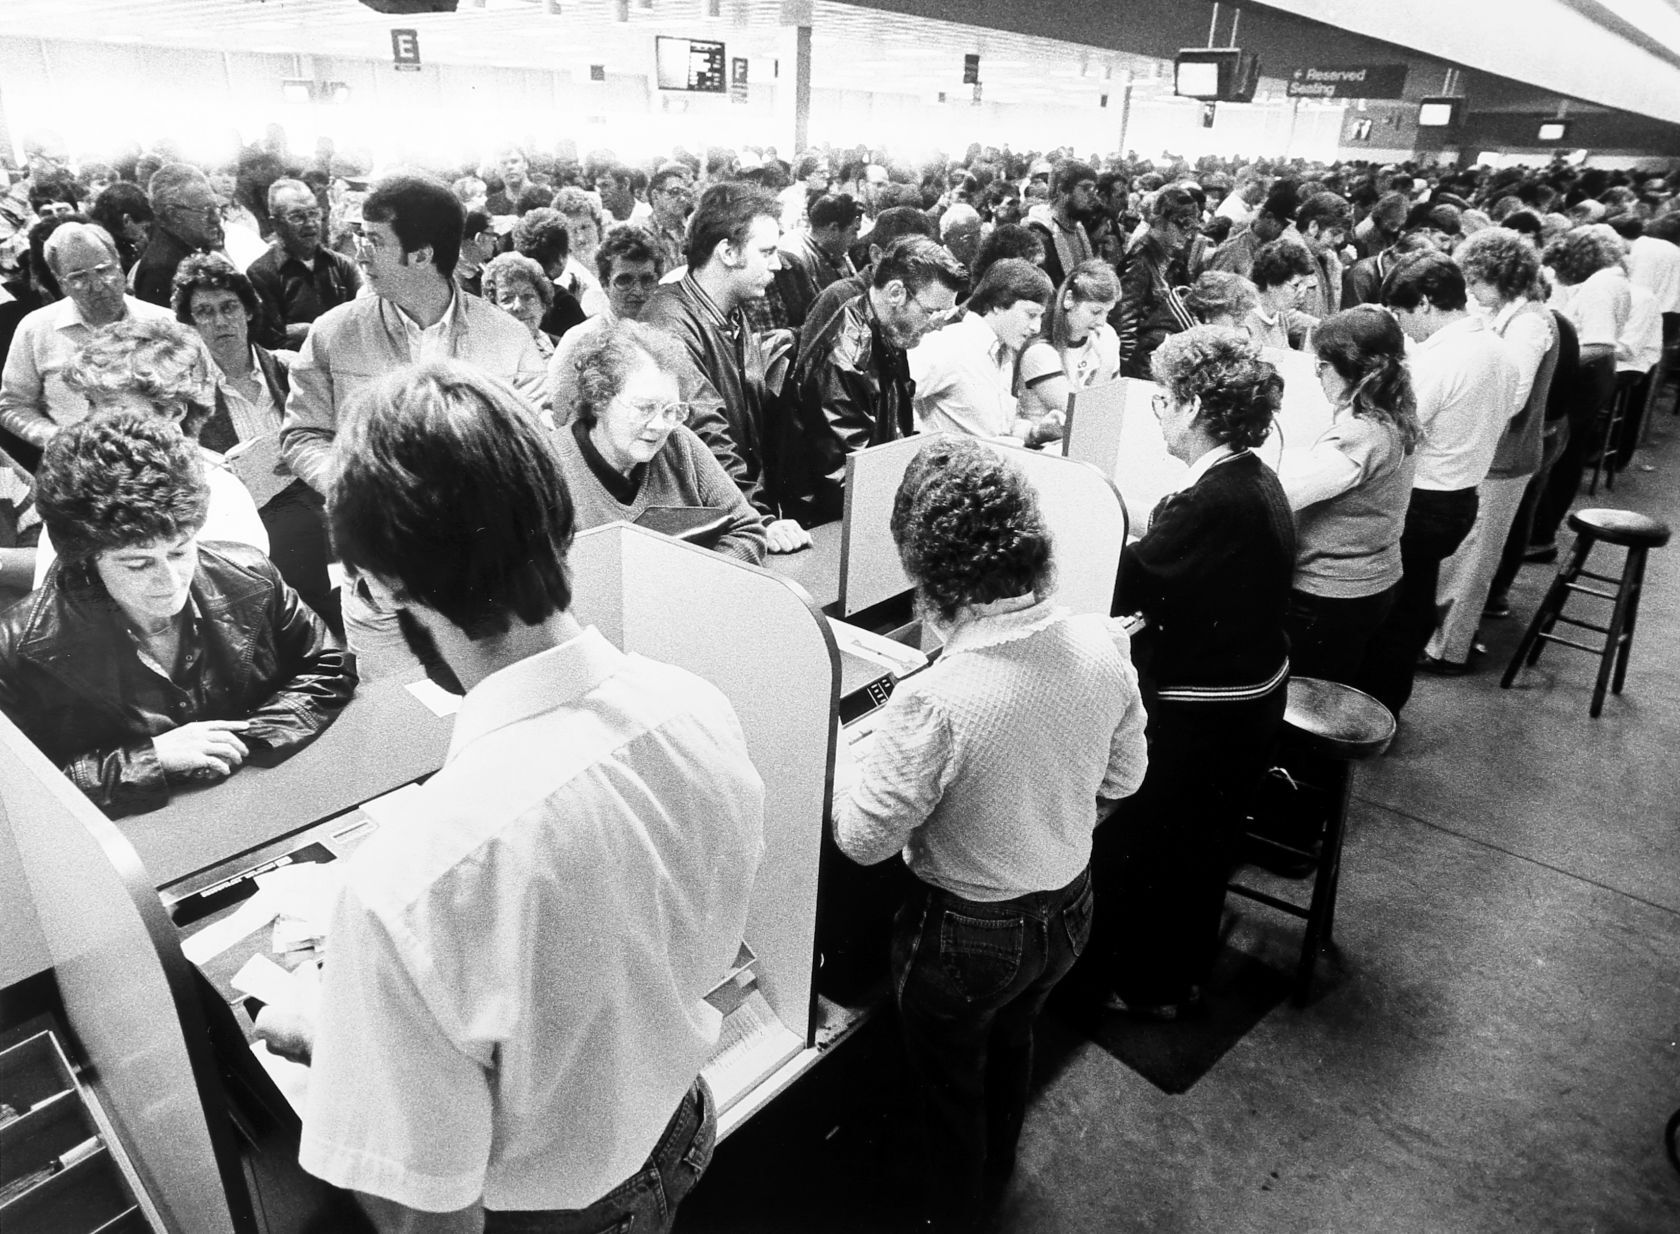 People place their bets at Dubuque Greyhound Park in 1985.    PHOTO CREDIT: Telegraph Herald file